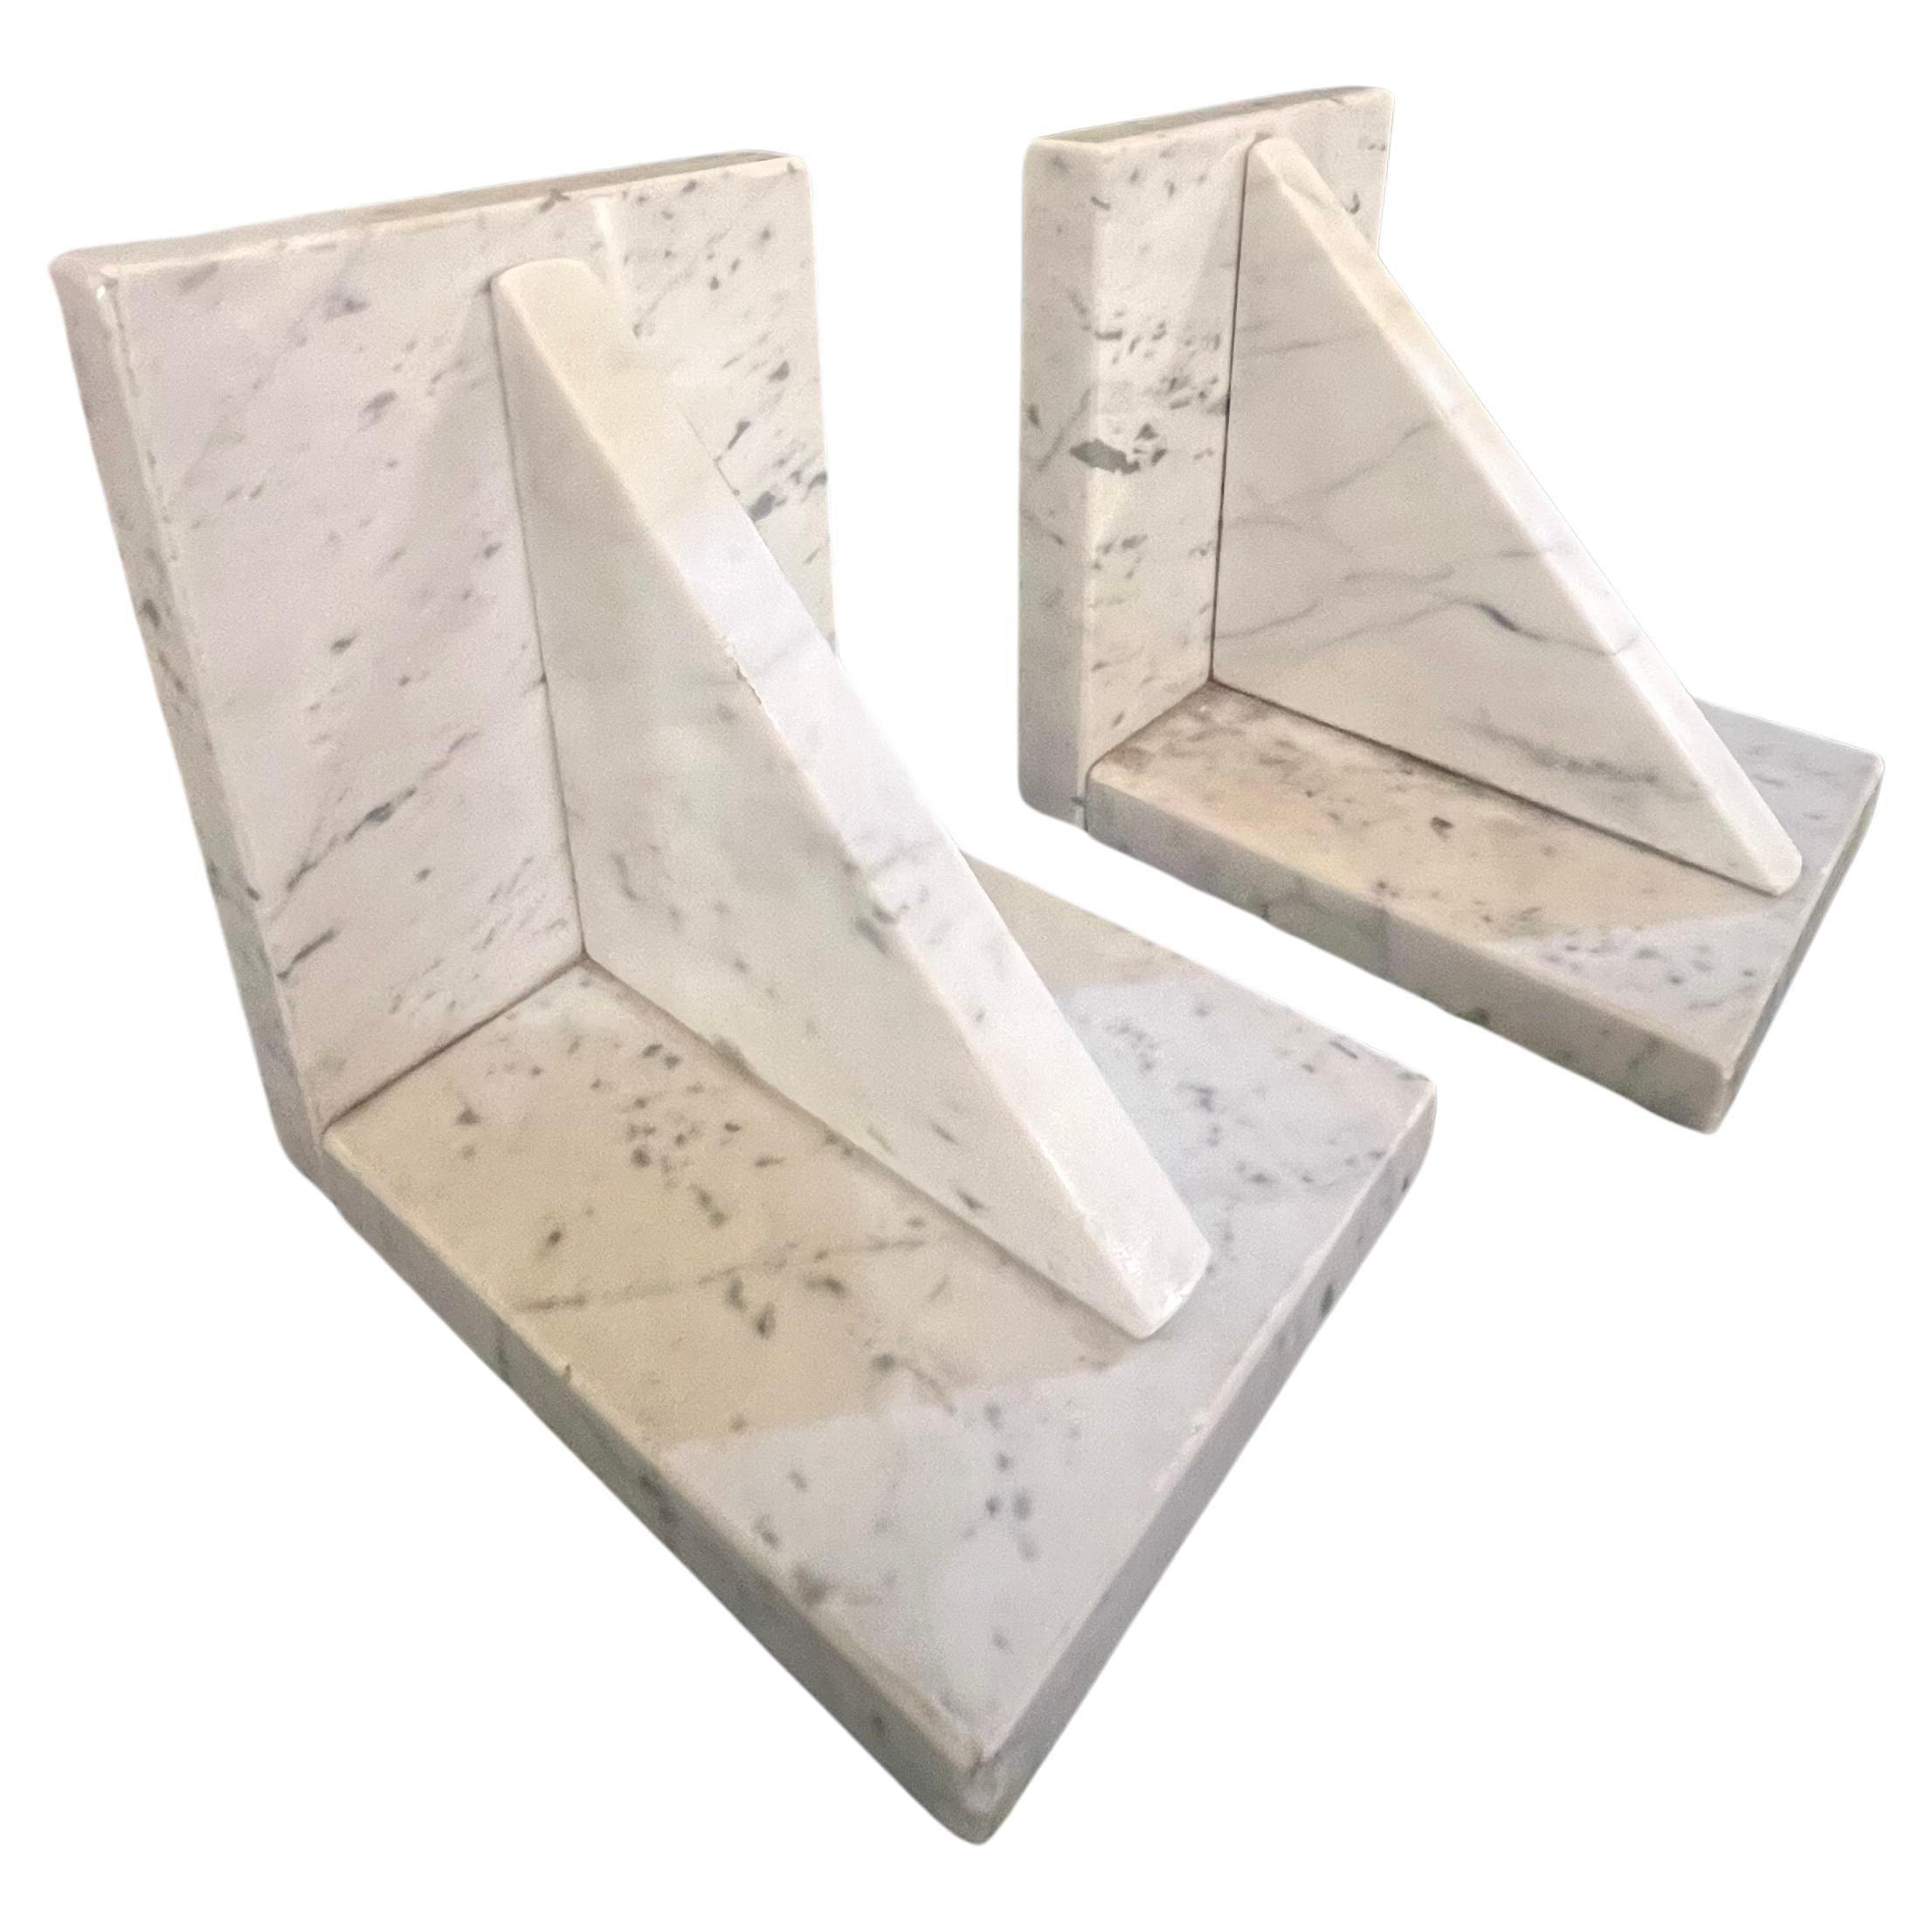 postmodern solid marble bookends nice lines great shape and design, classic 1980's Memphis-era design.